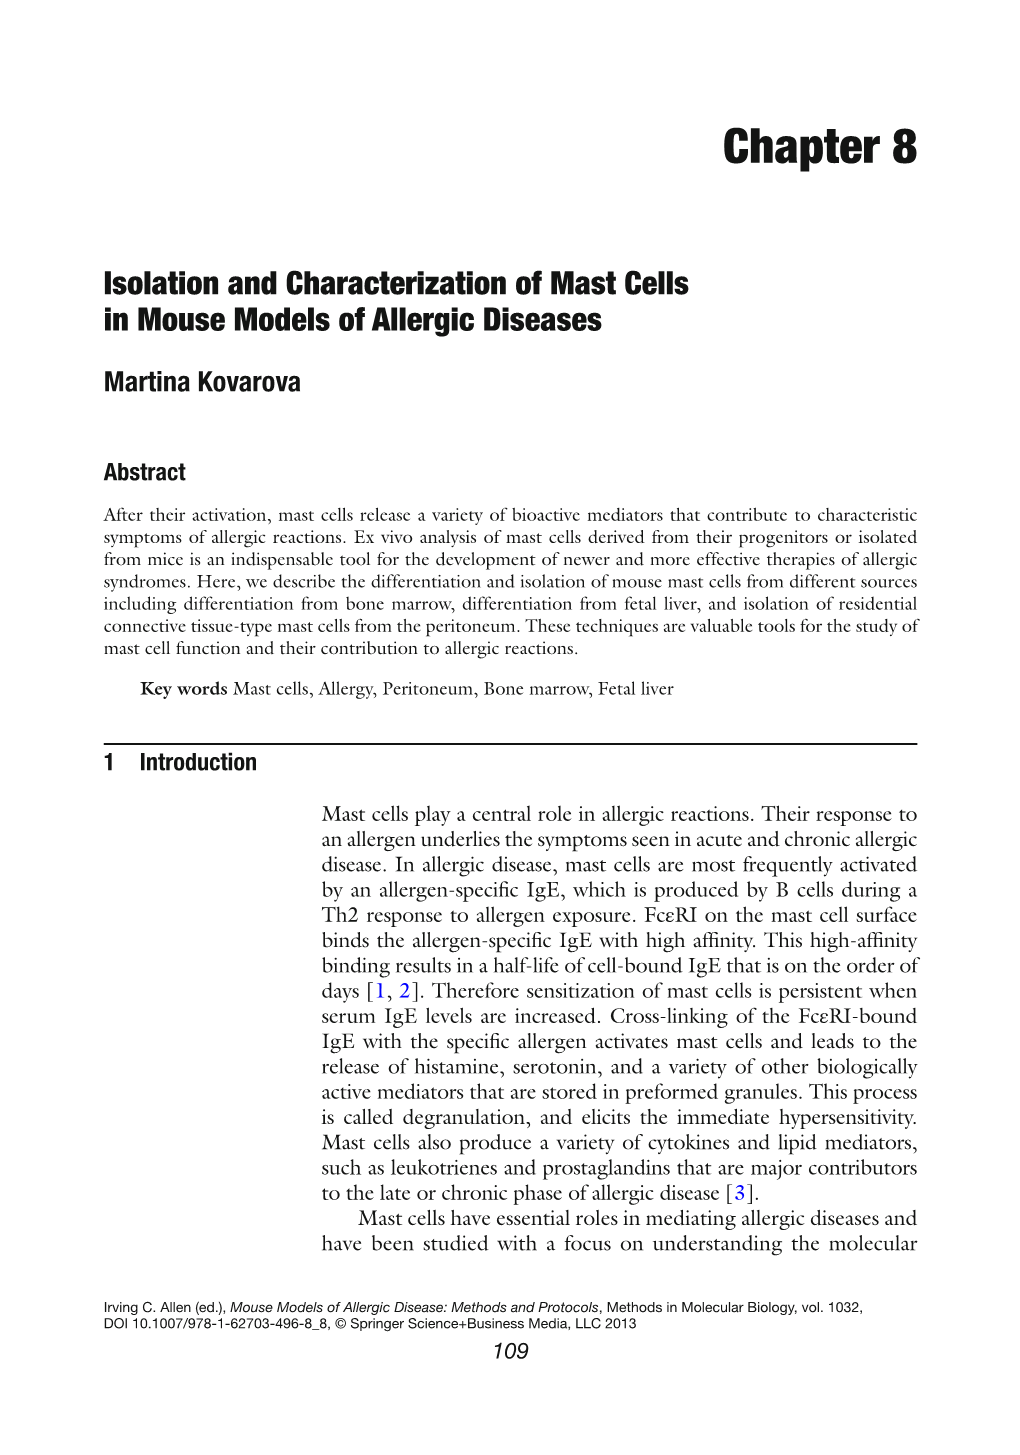 Chapter 8 Isolation and Characterization of Mast Cells In